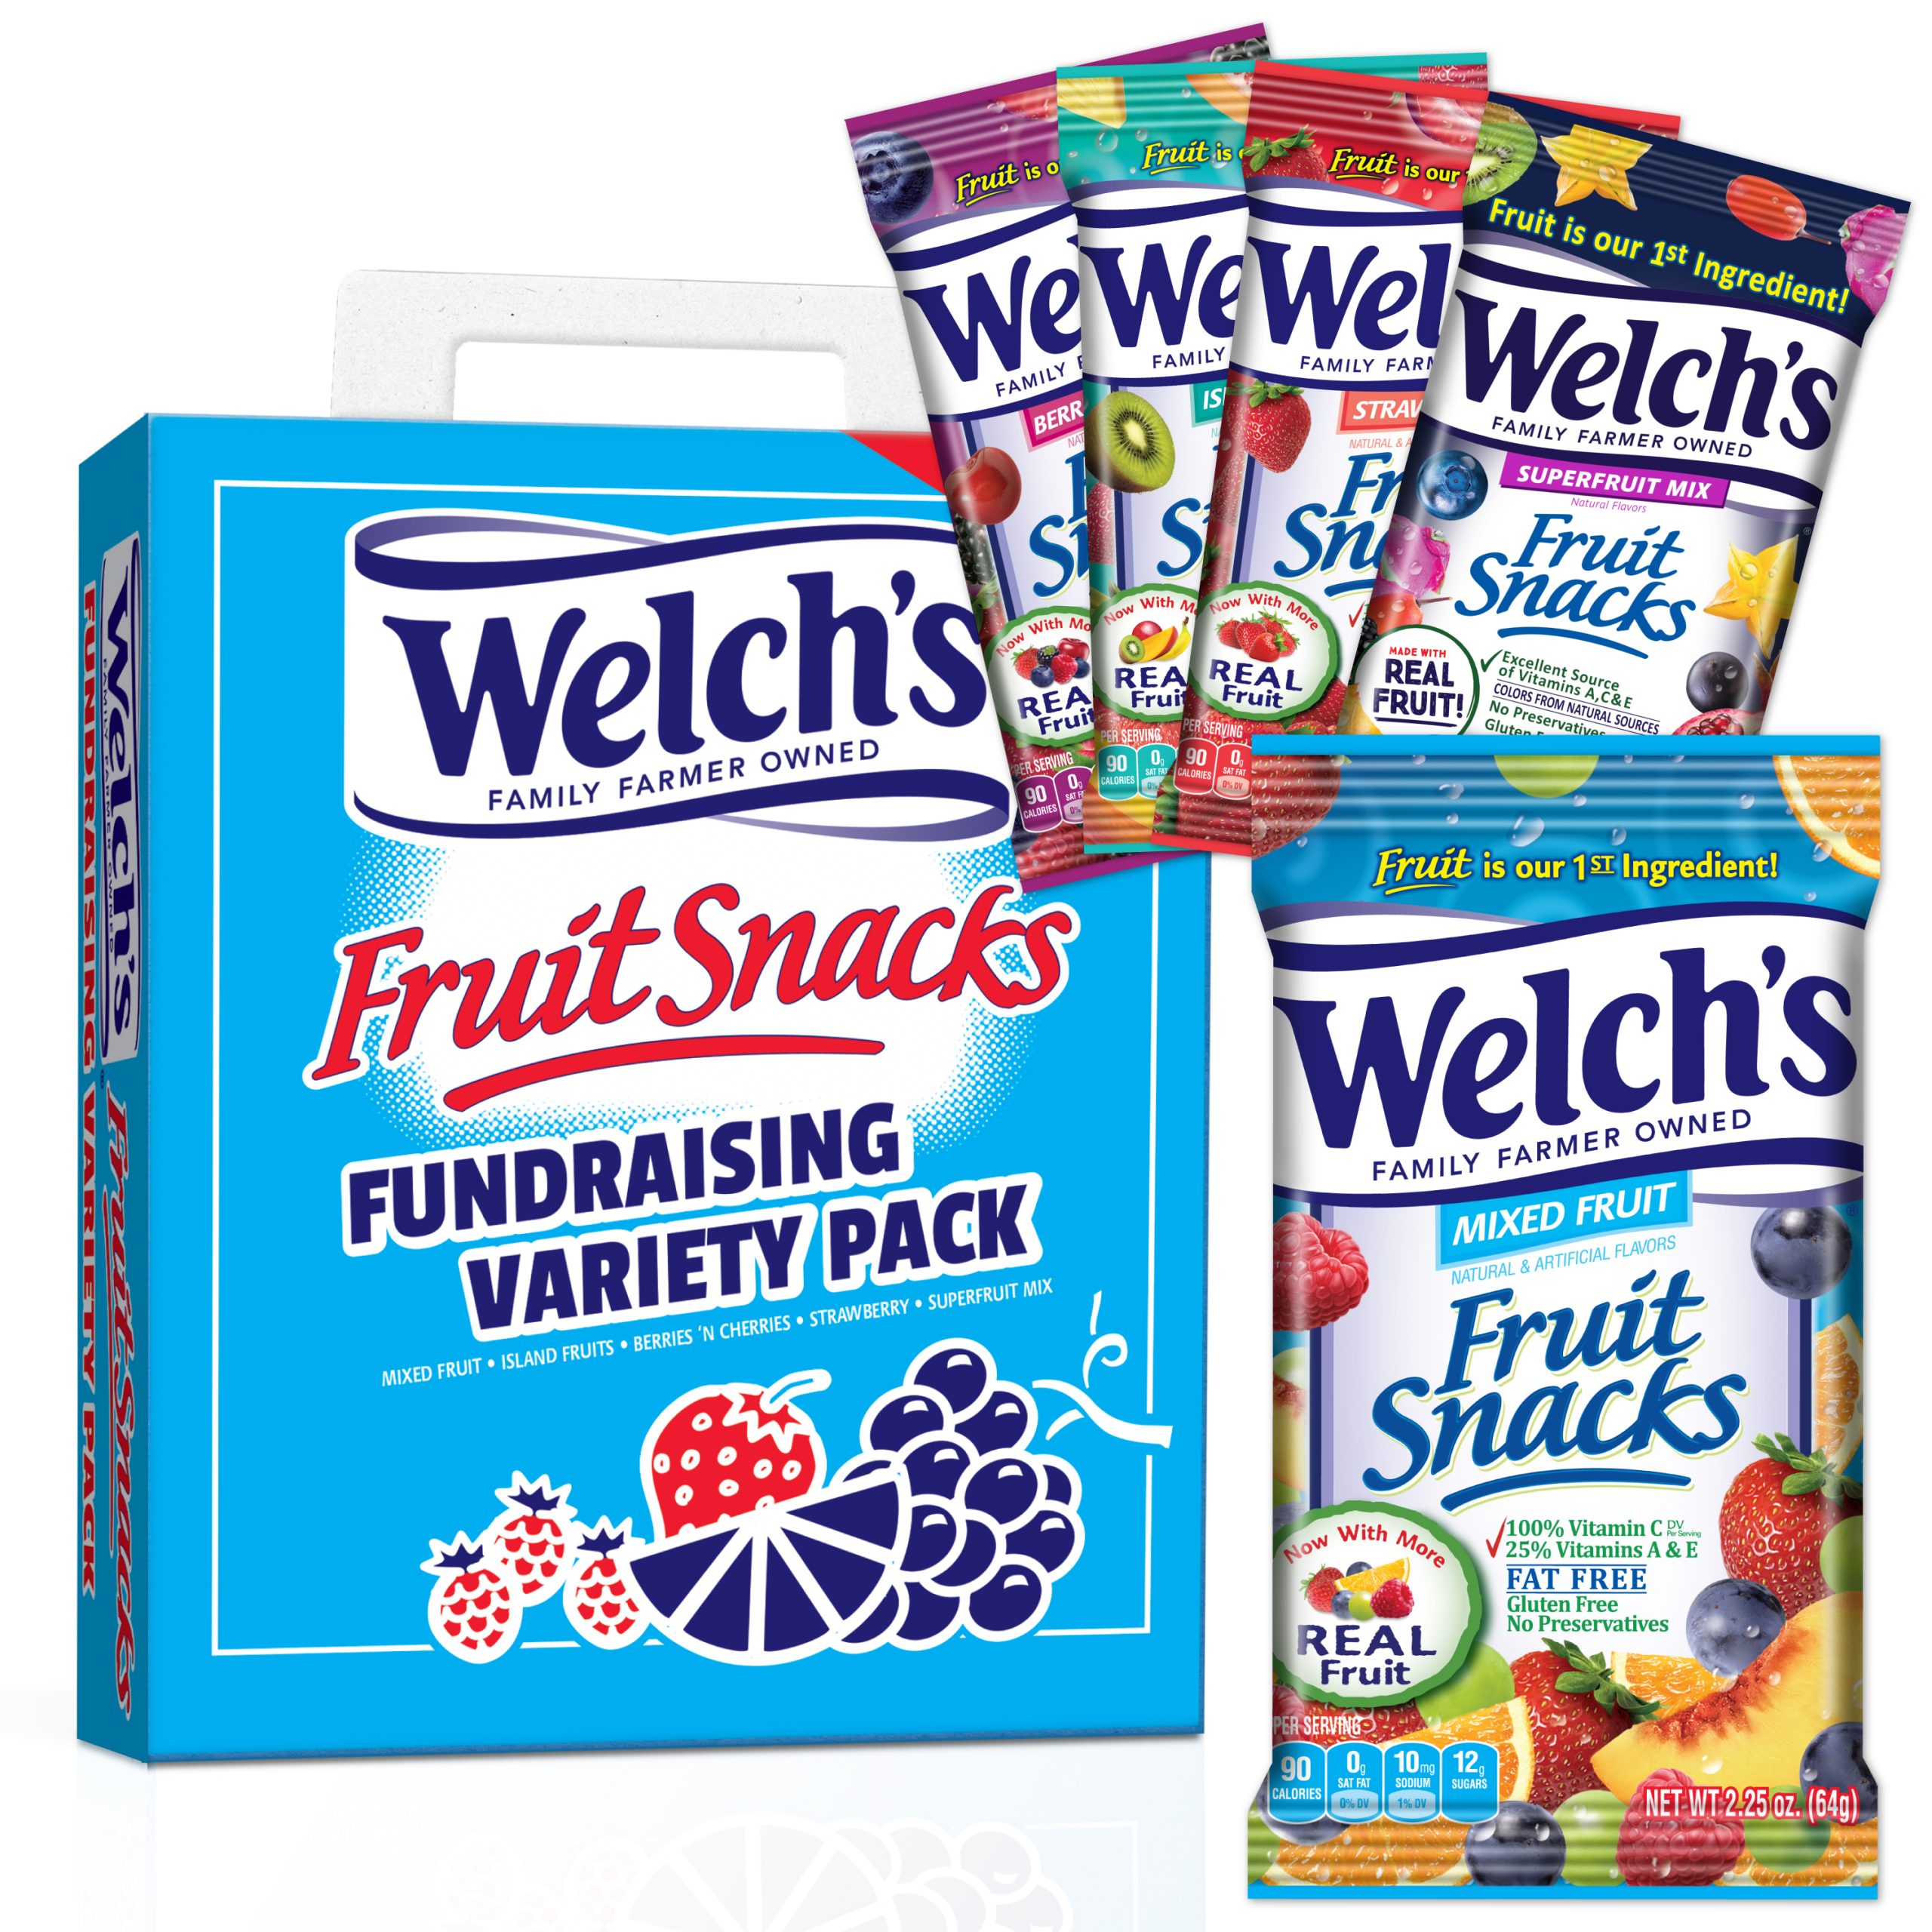 Welch's Fruit Snack Box 2020